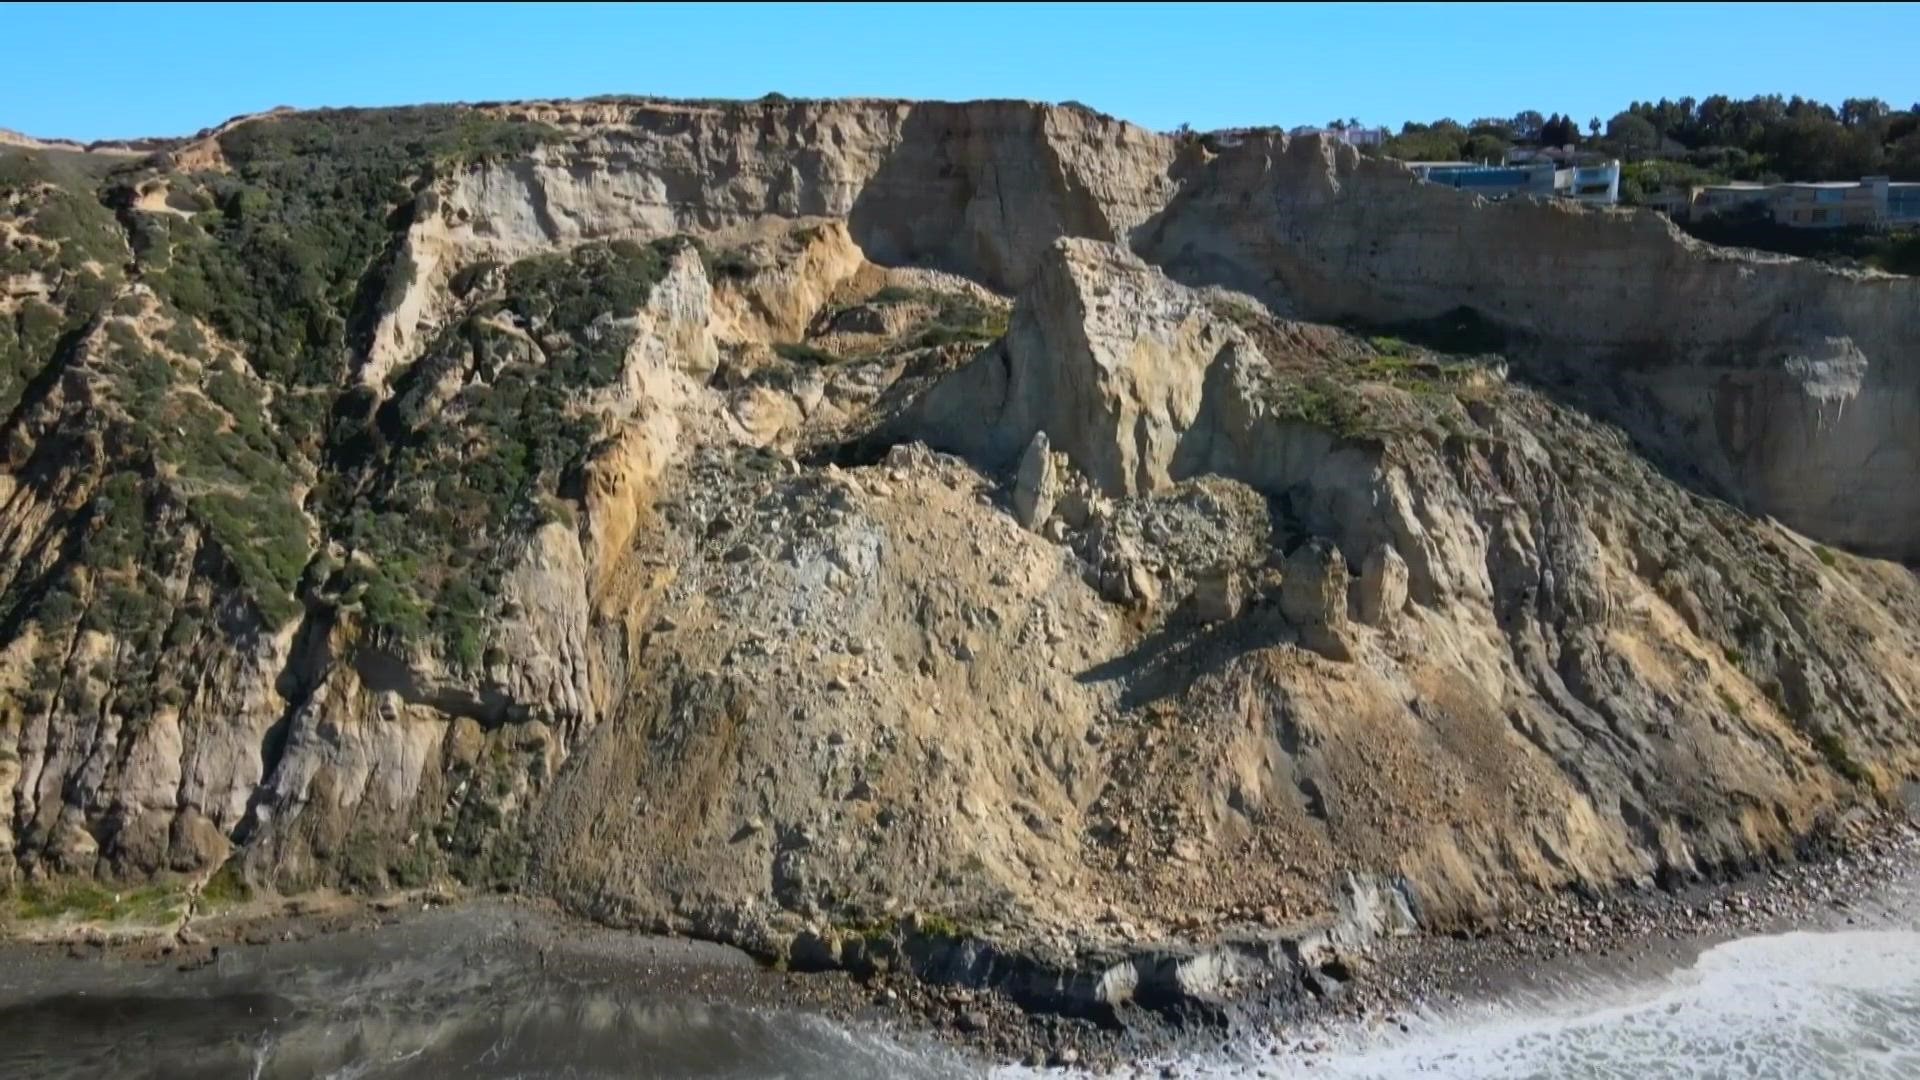 Black's Beach in Torrey Pines split in two after a dramatic bluff collapse.